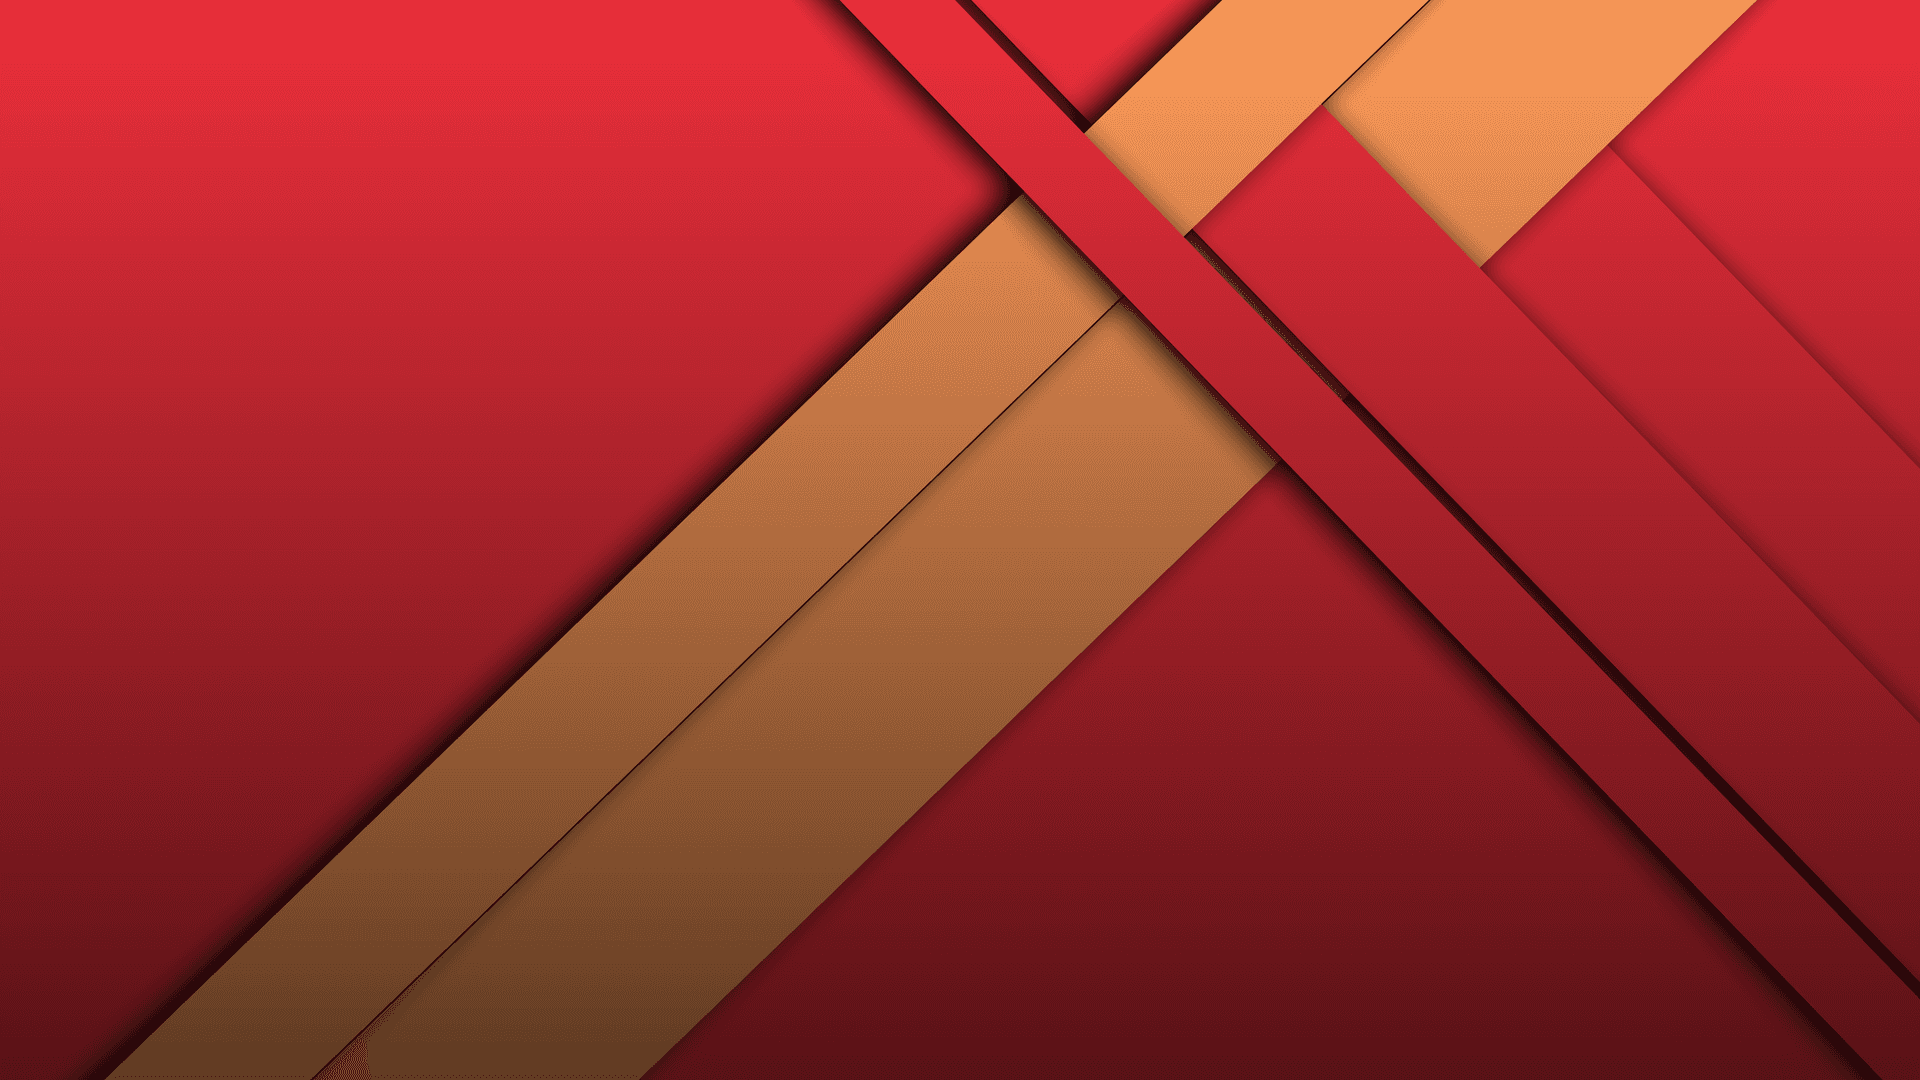 Rich Red and Gold Faded Stripes Abstract Wallpaper